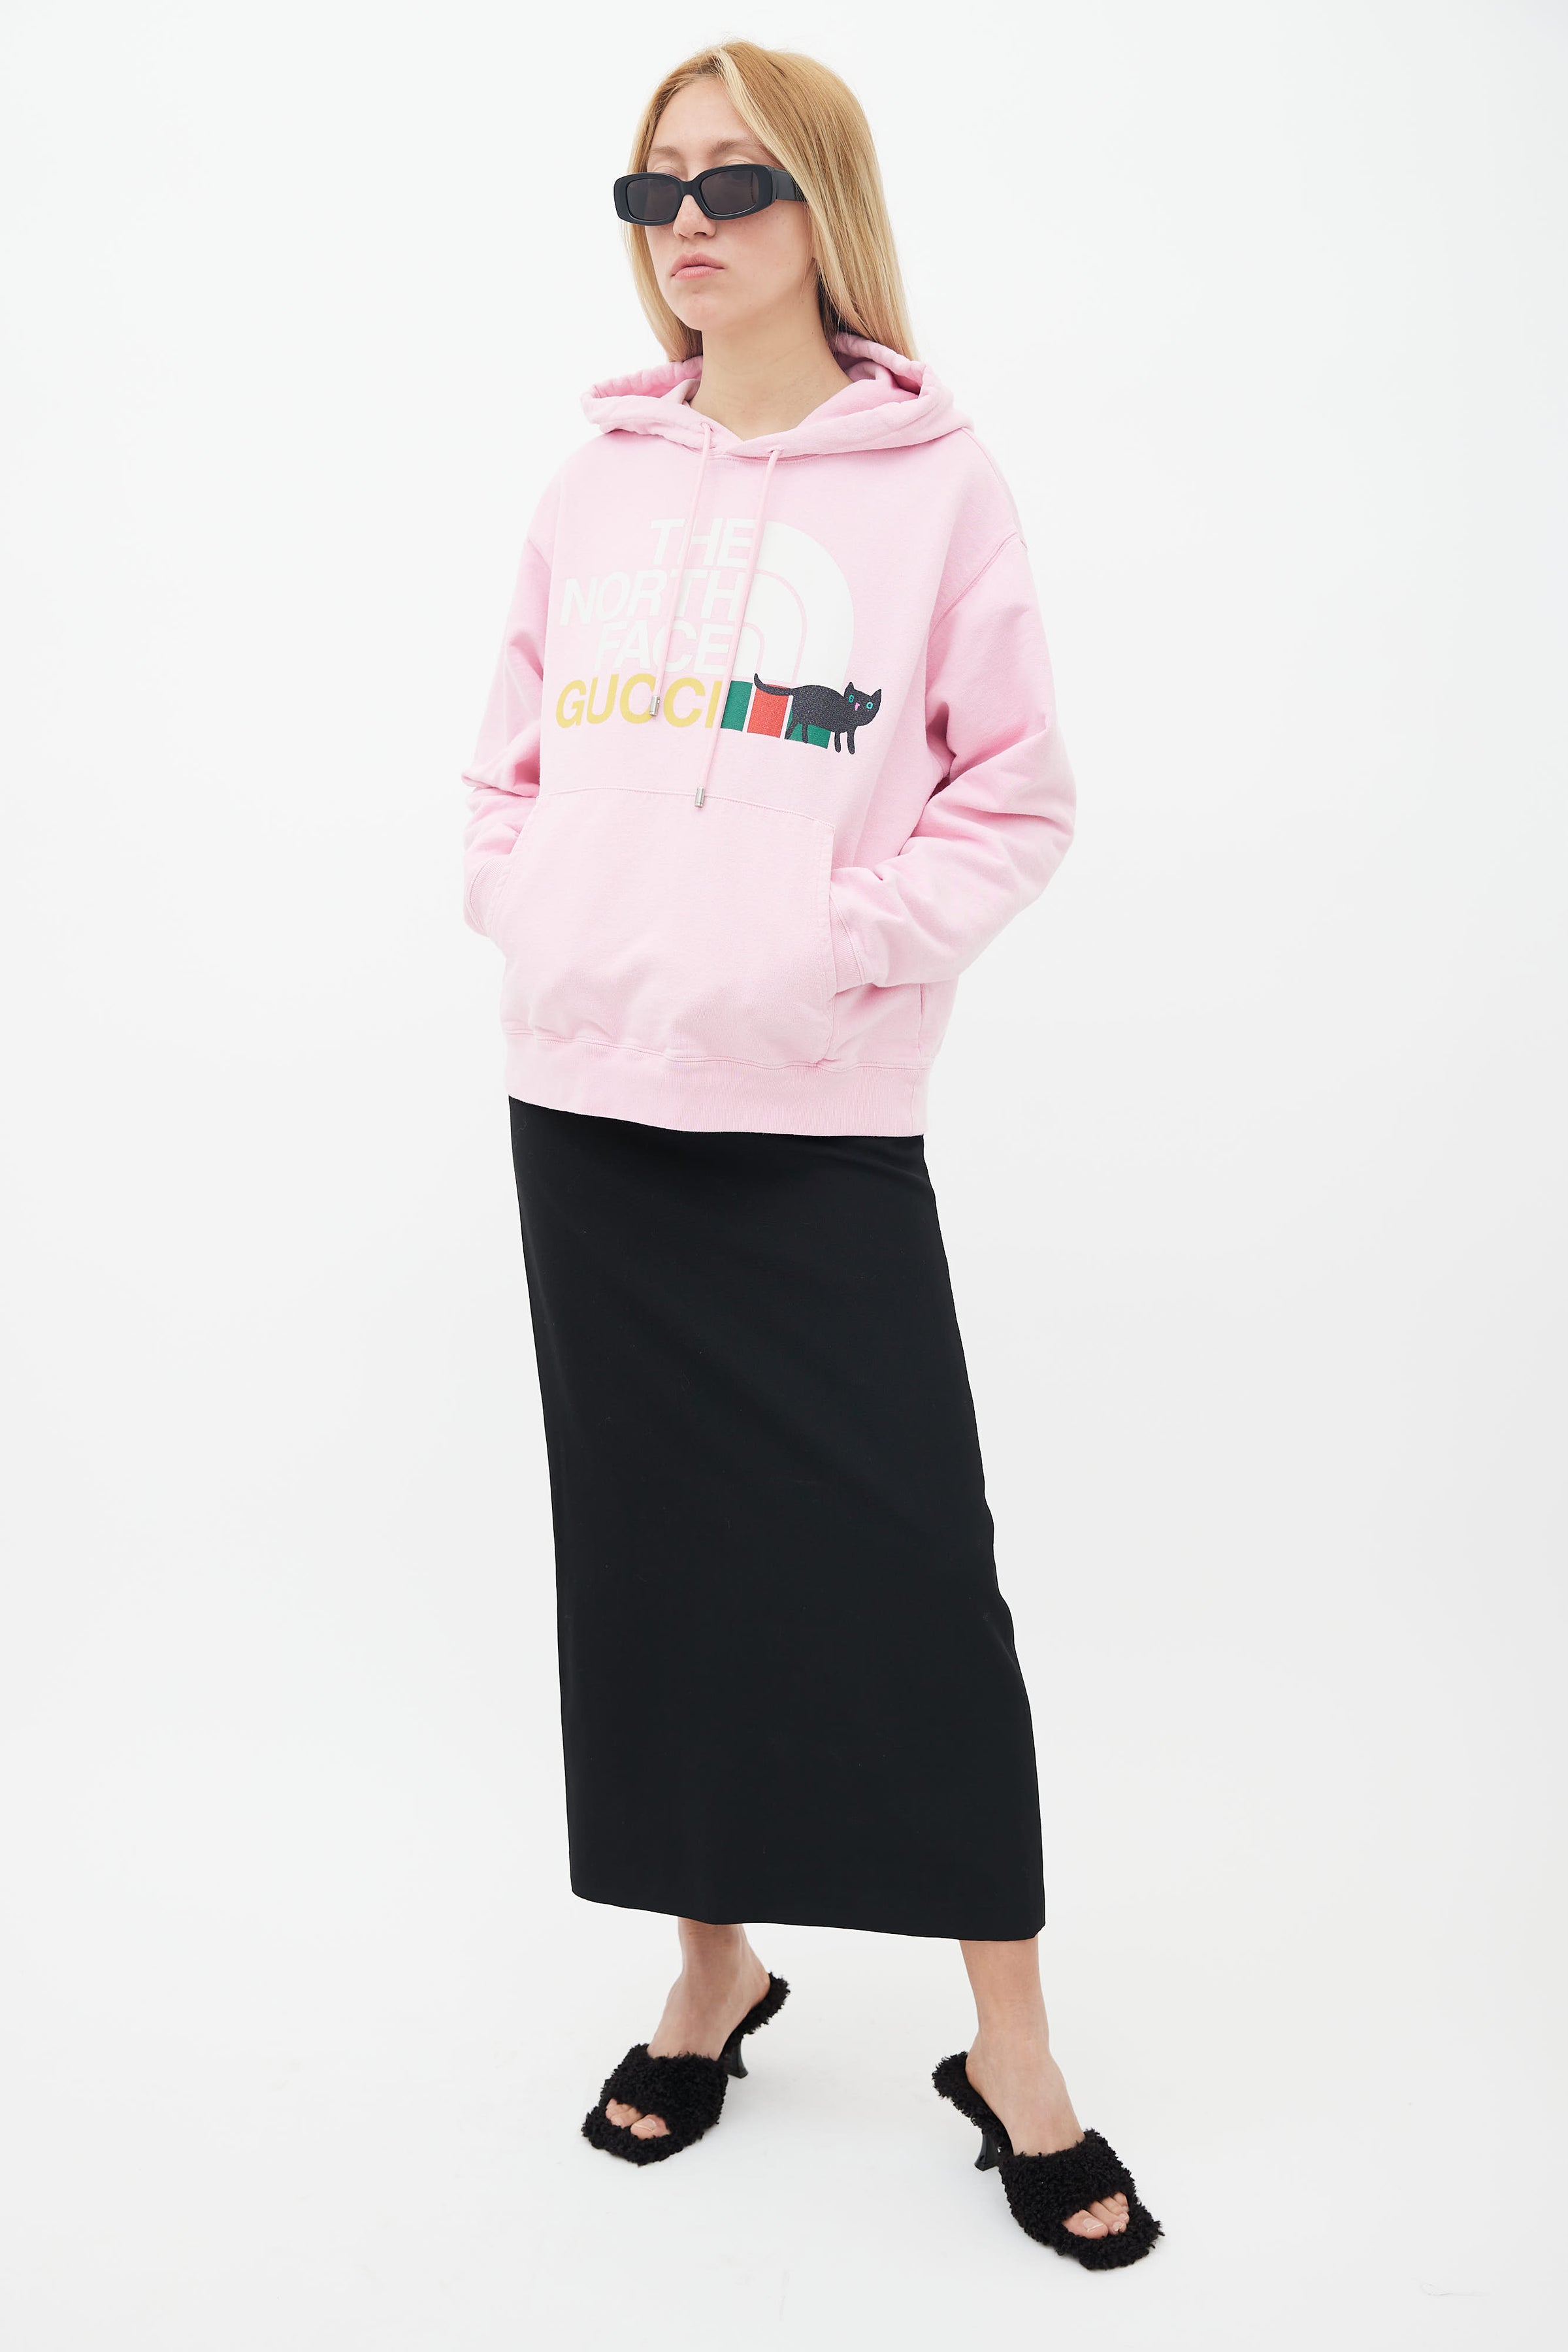 Gucci x The North Face Womens Cotton Oversized Sweatshirt White